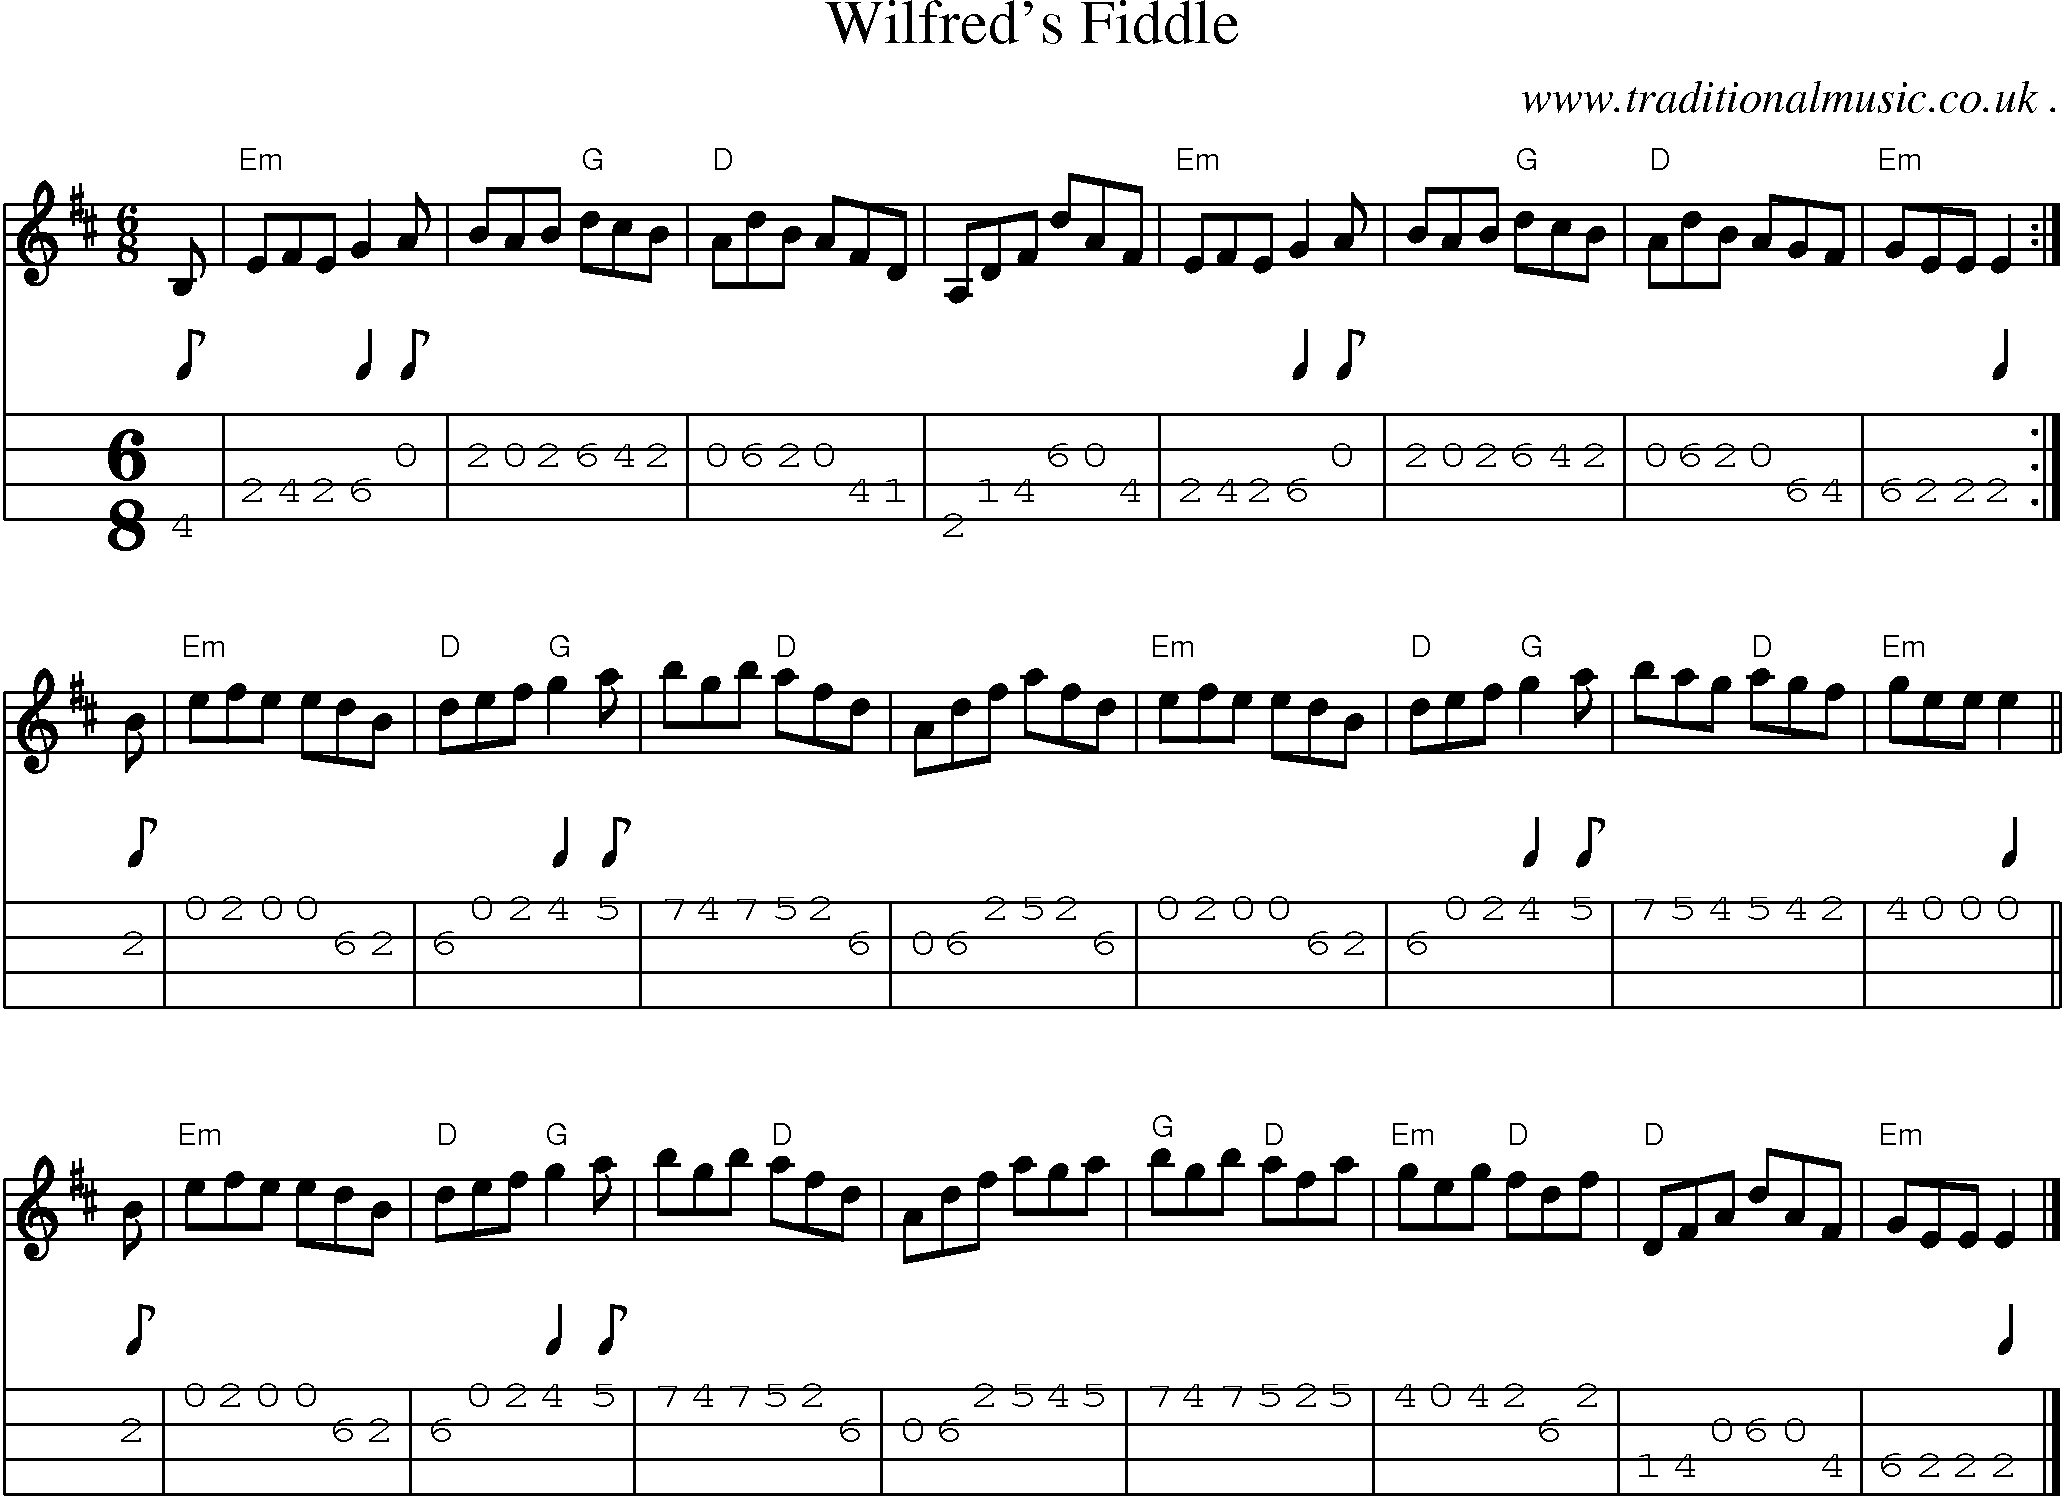 Sheet-music  score, Chords and Mandolin Tabs for Wilfreds Fiddle